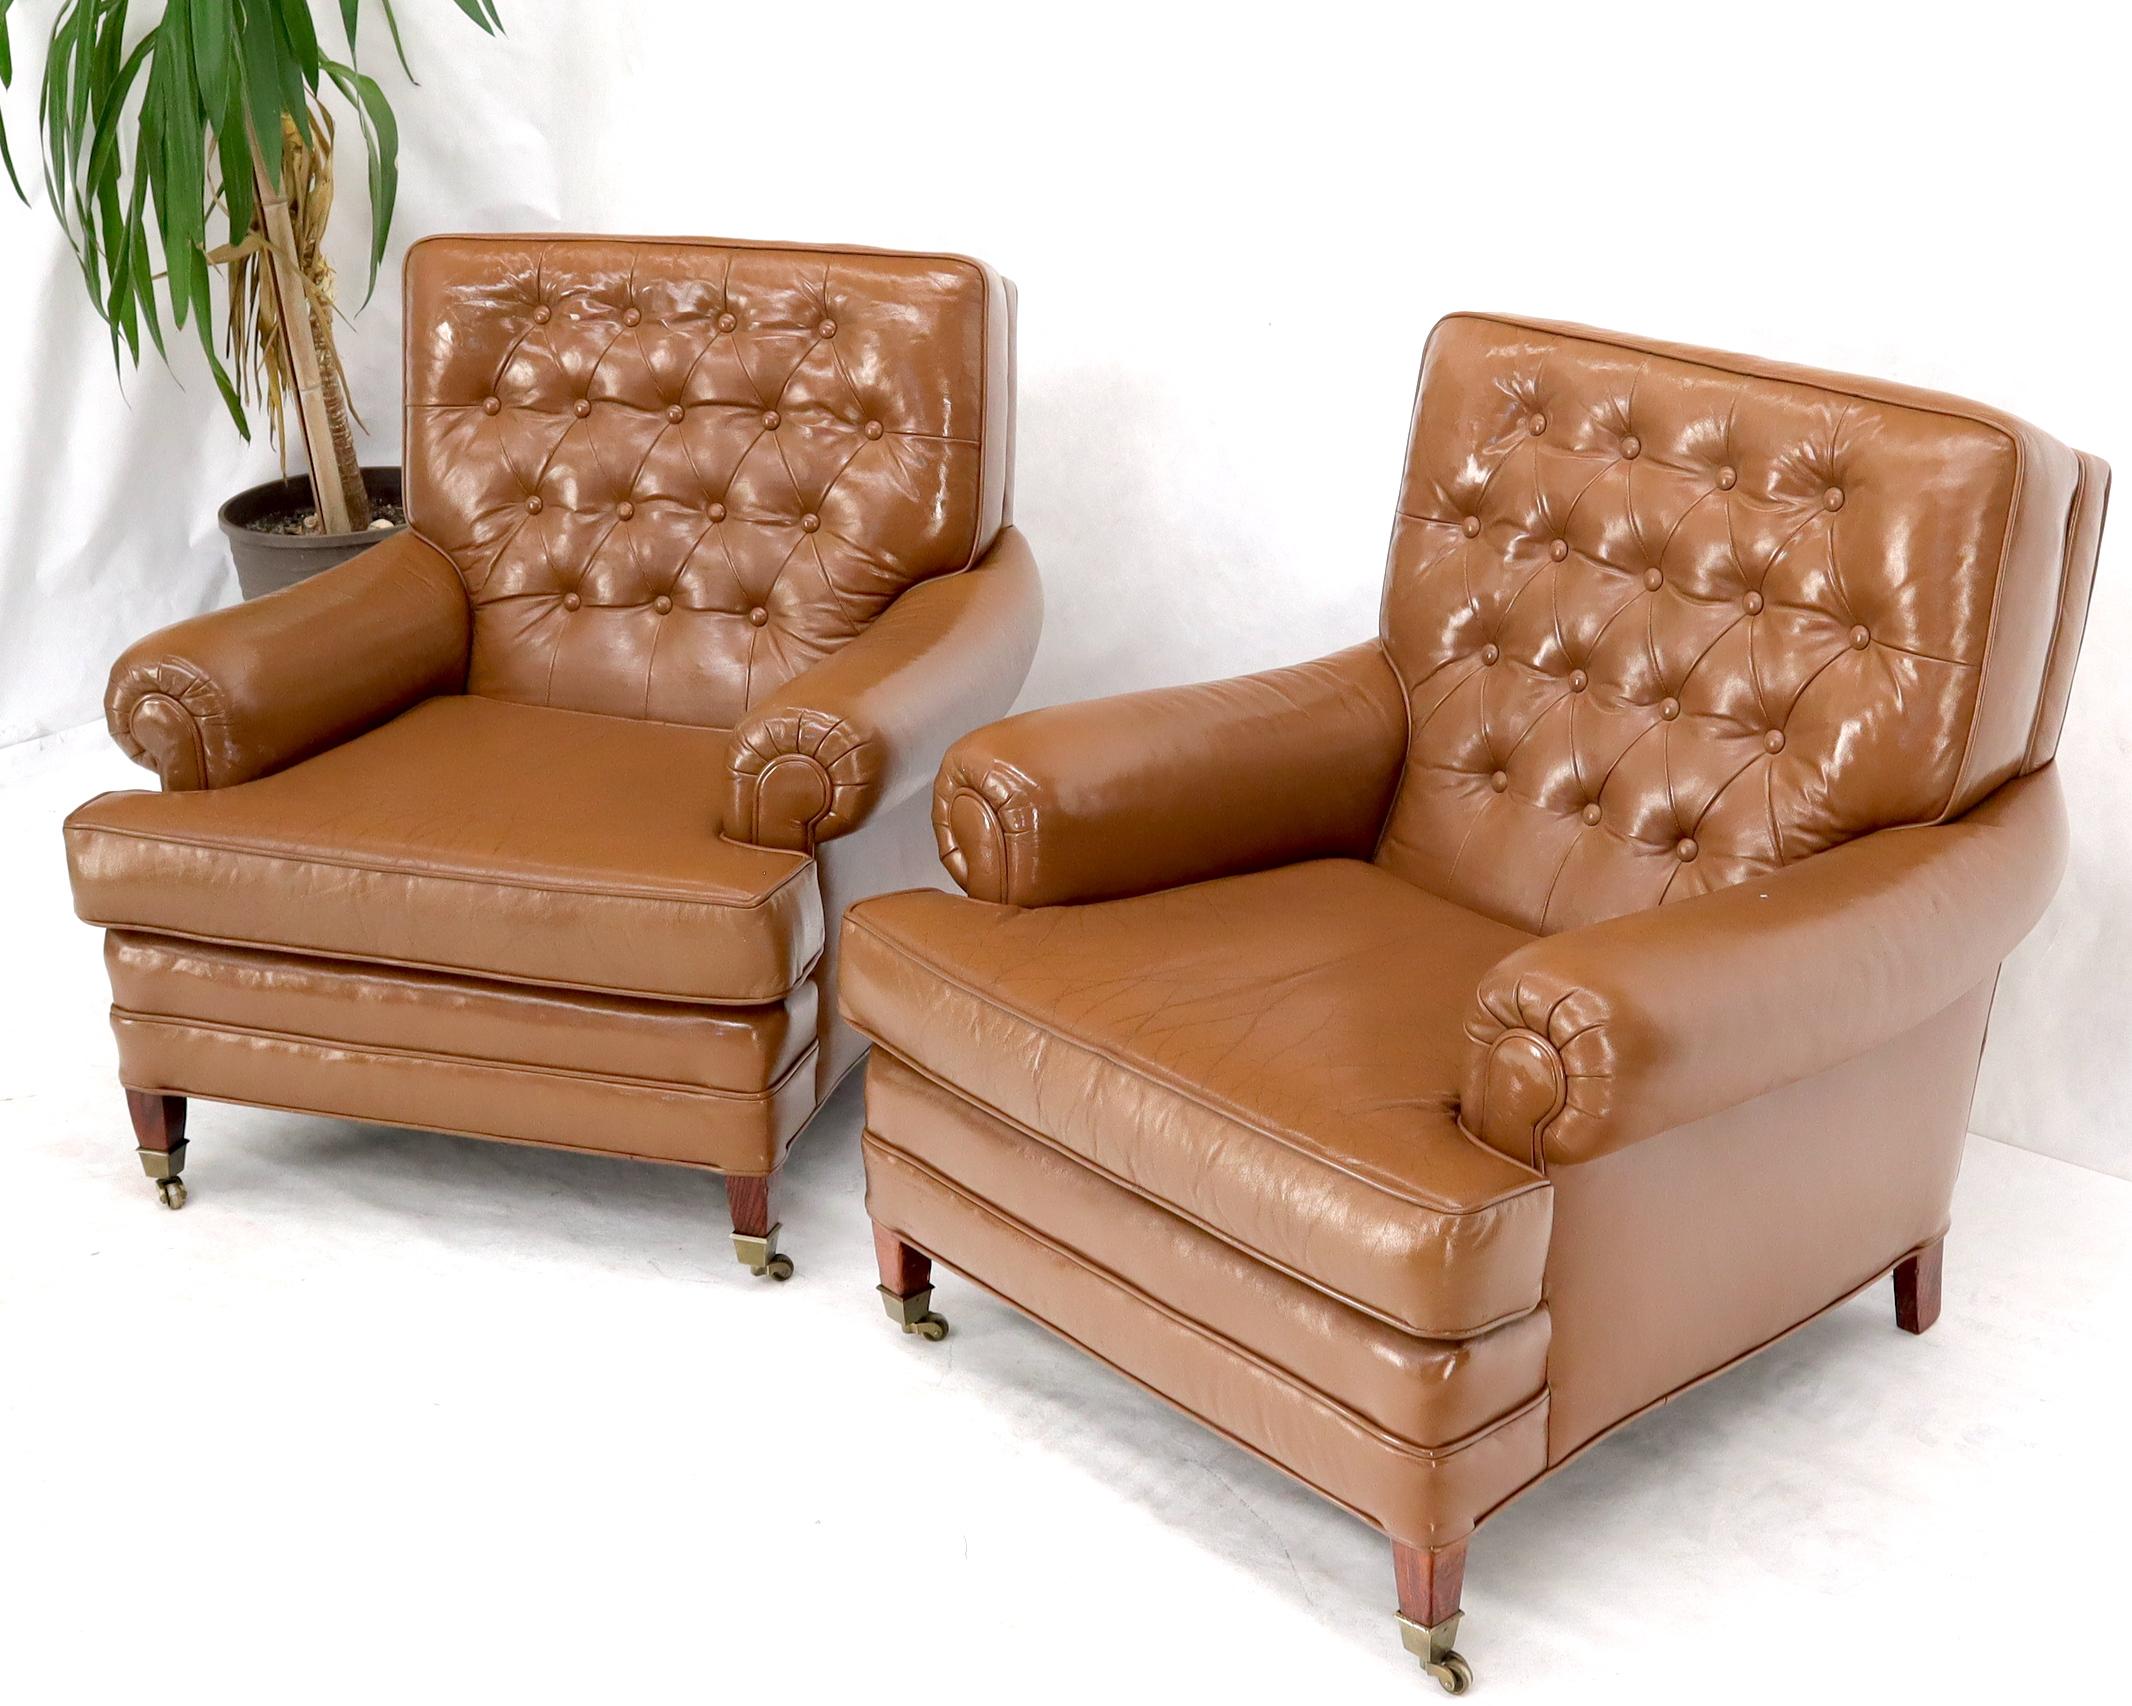 Pair of Chesterfield Style Leather Chairs W/ Ottomans Brown to Tan For Sale 1